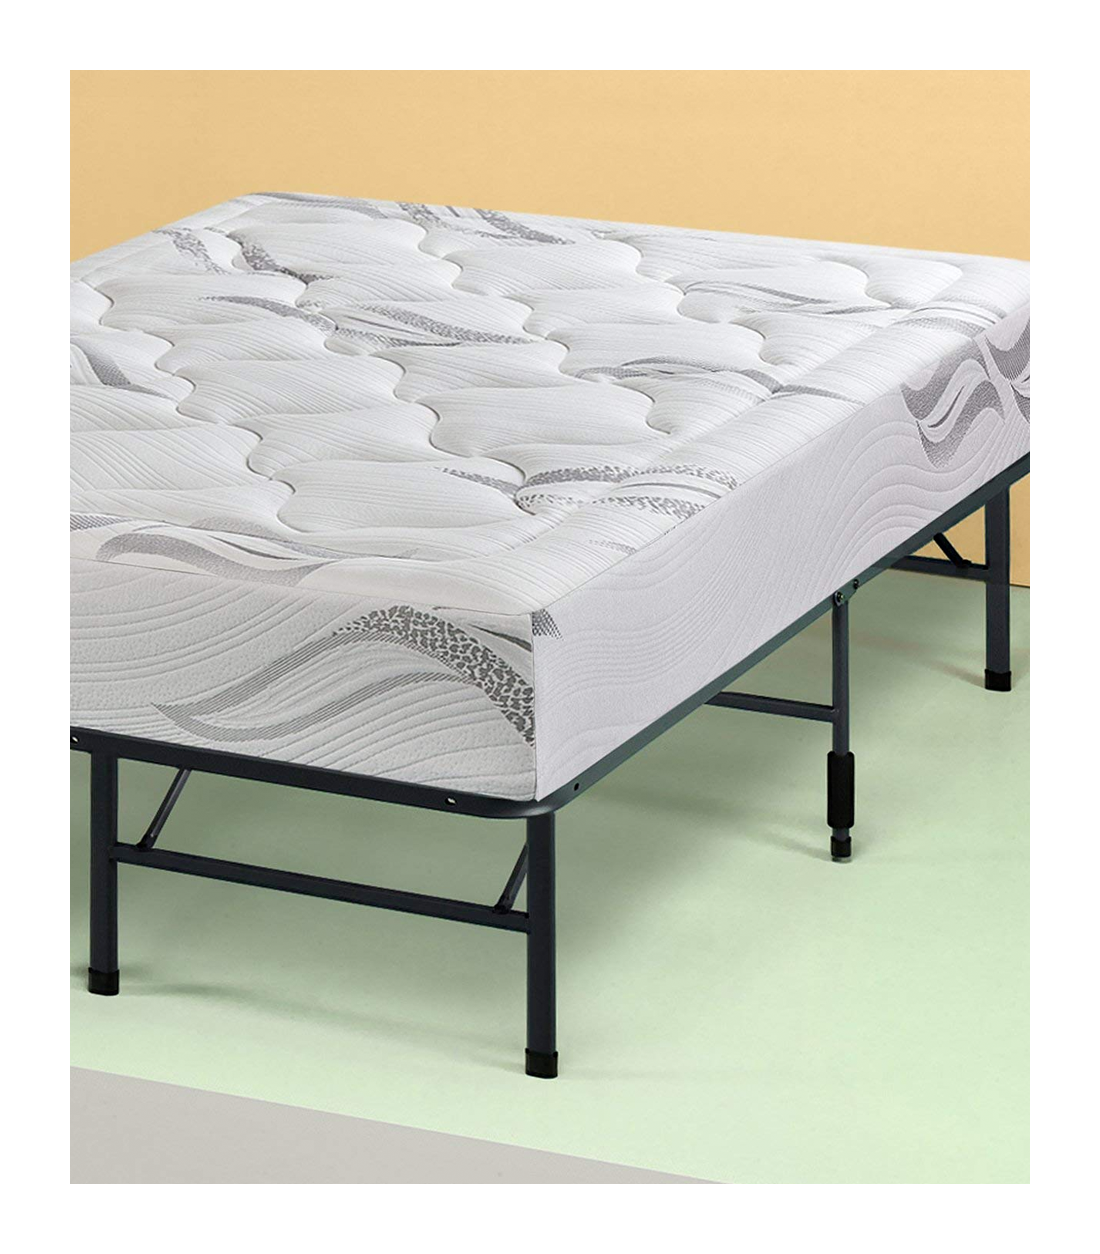 How To Create The Ideal Bed Frame Mattress Bedding Selection Care Tips